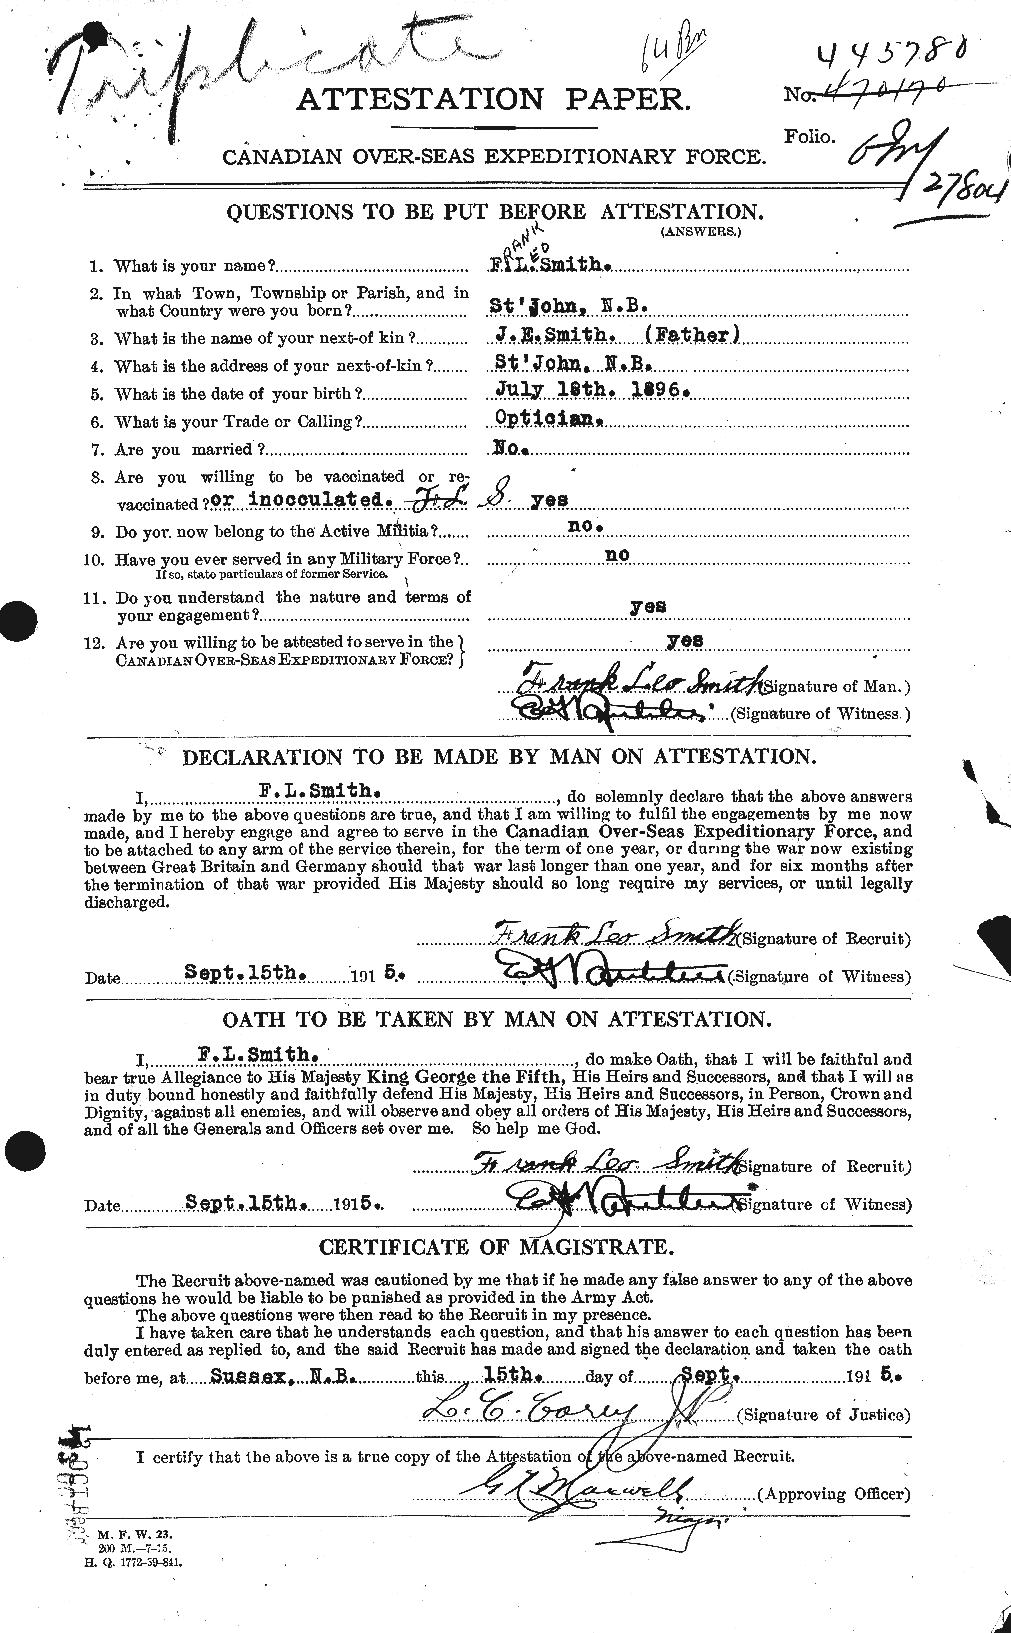 Personnel Records of the First World War - CEF 106586a